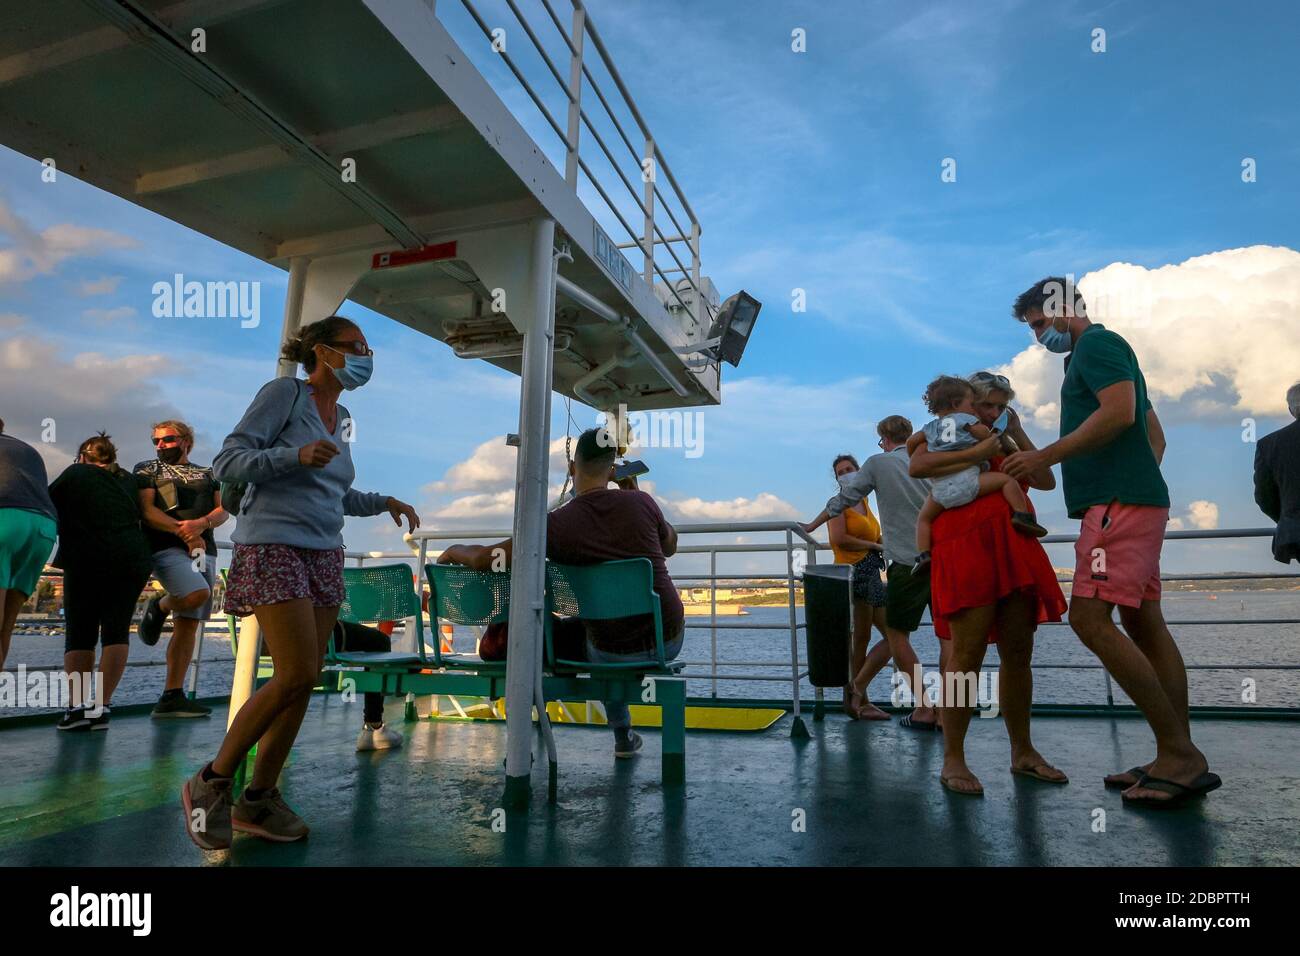 Passengers on a ferry in face masks during the coronavirus crisis in Olbia, Sardinia, Italy. Stock Photo